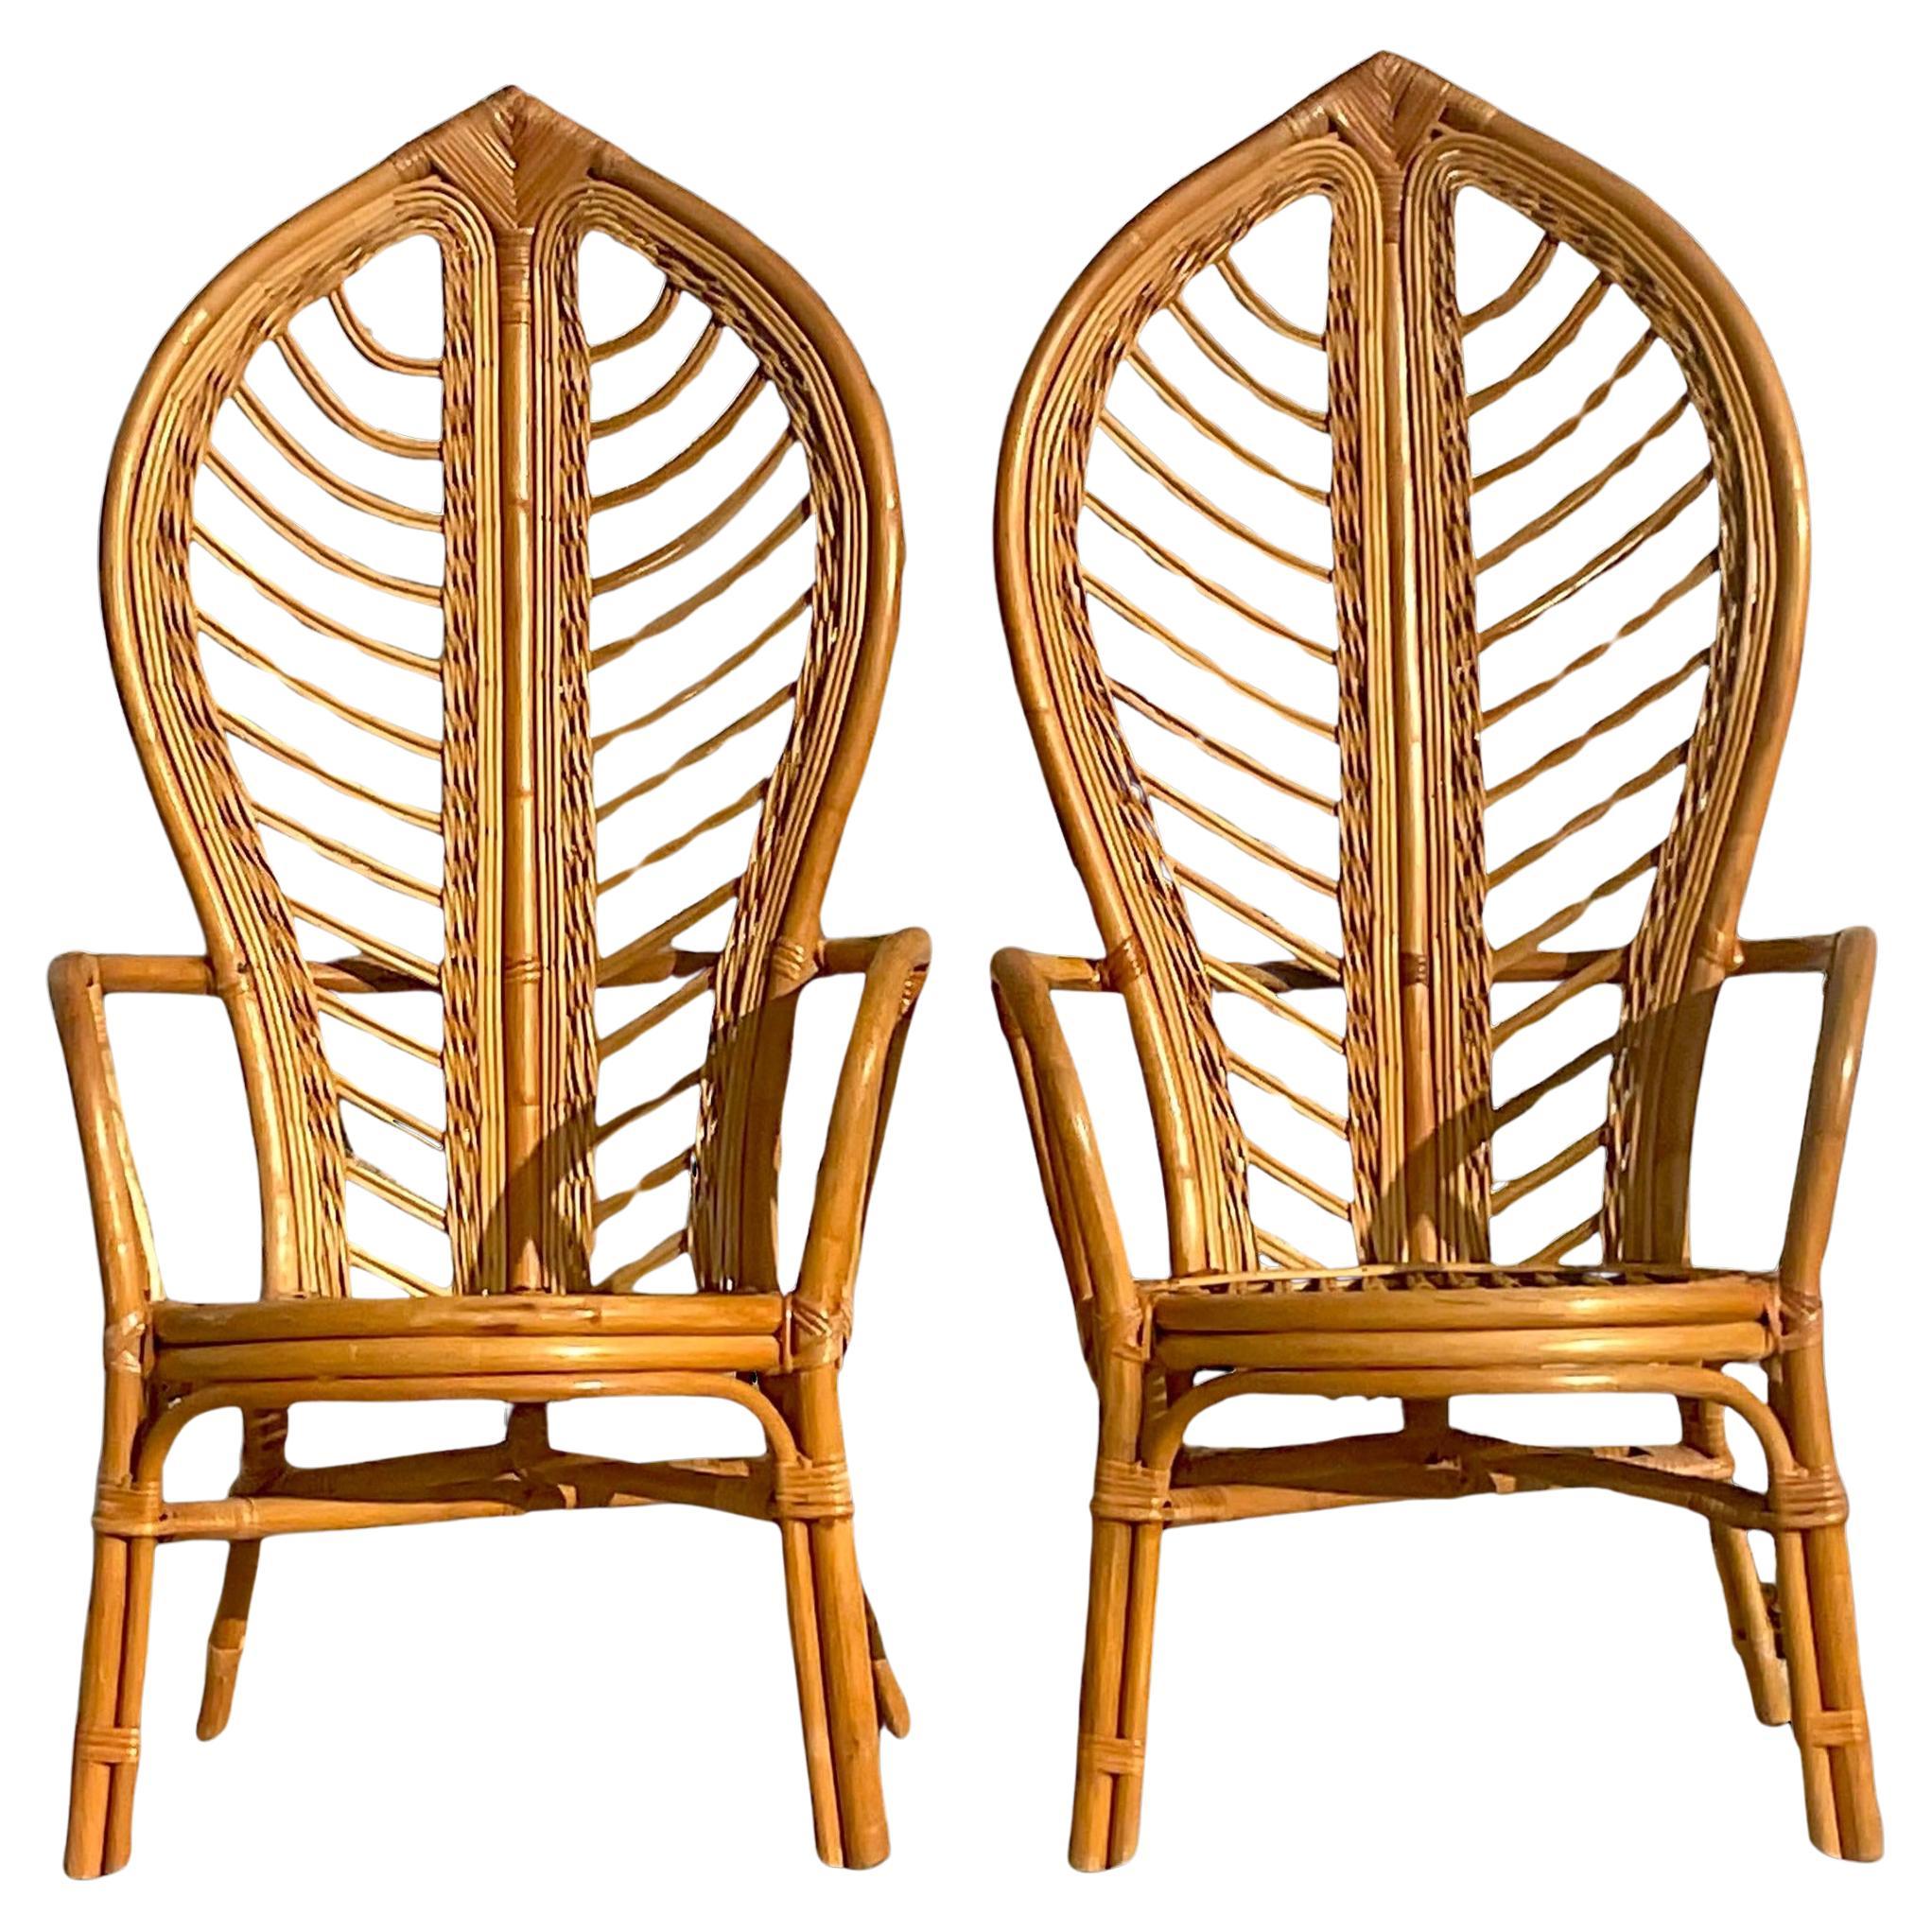 Can I refinish rattan chairs?